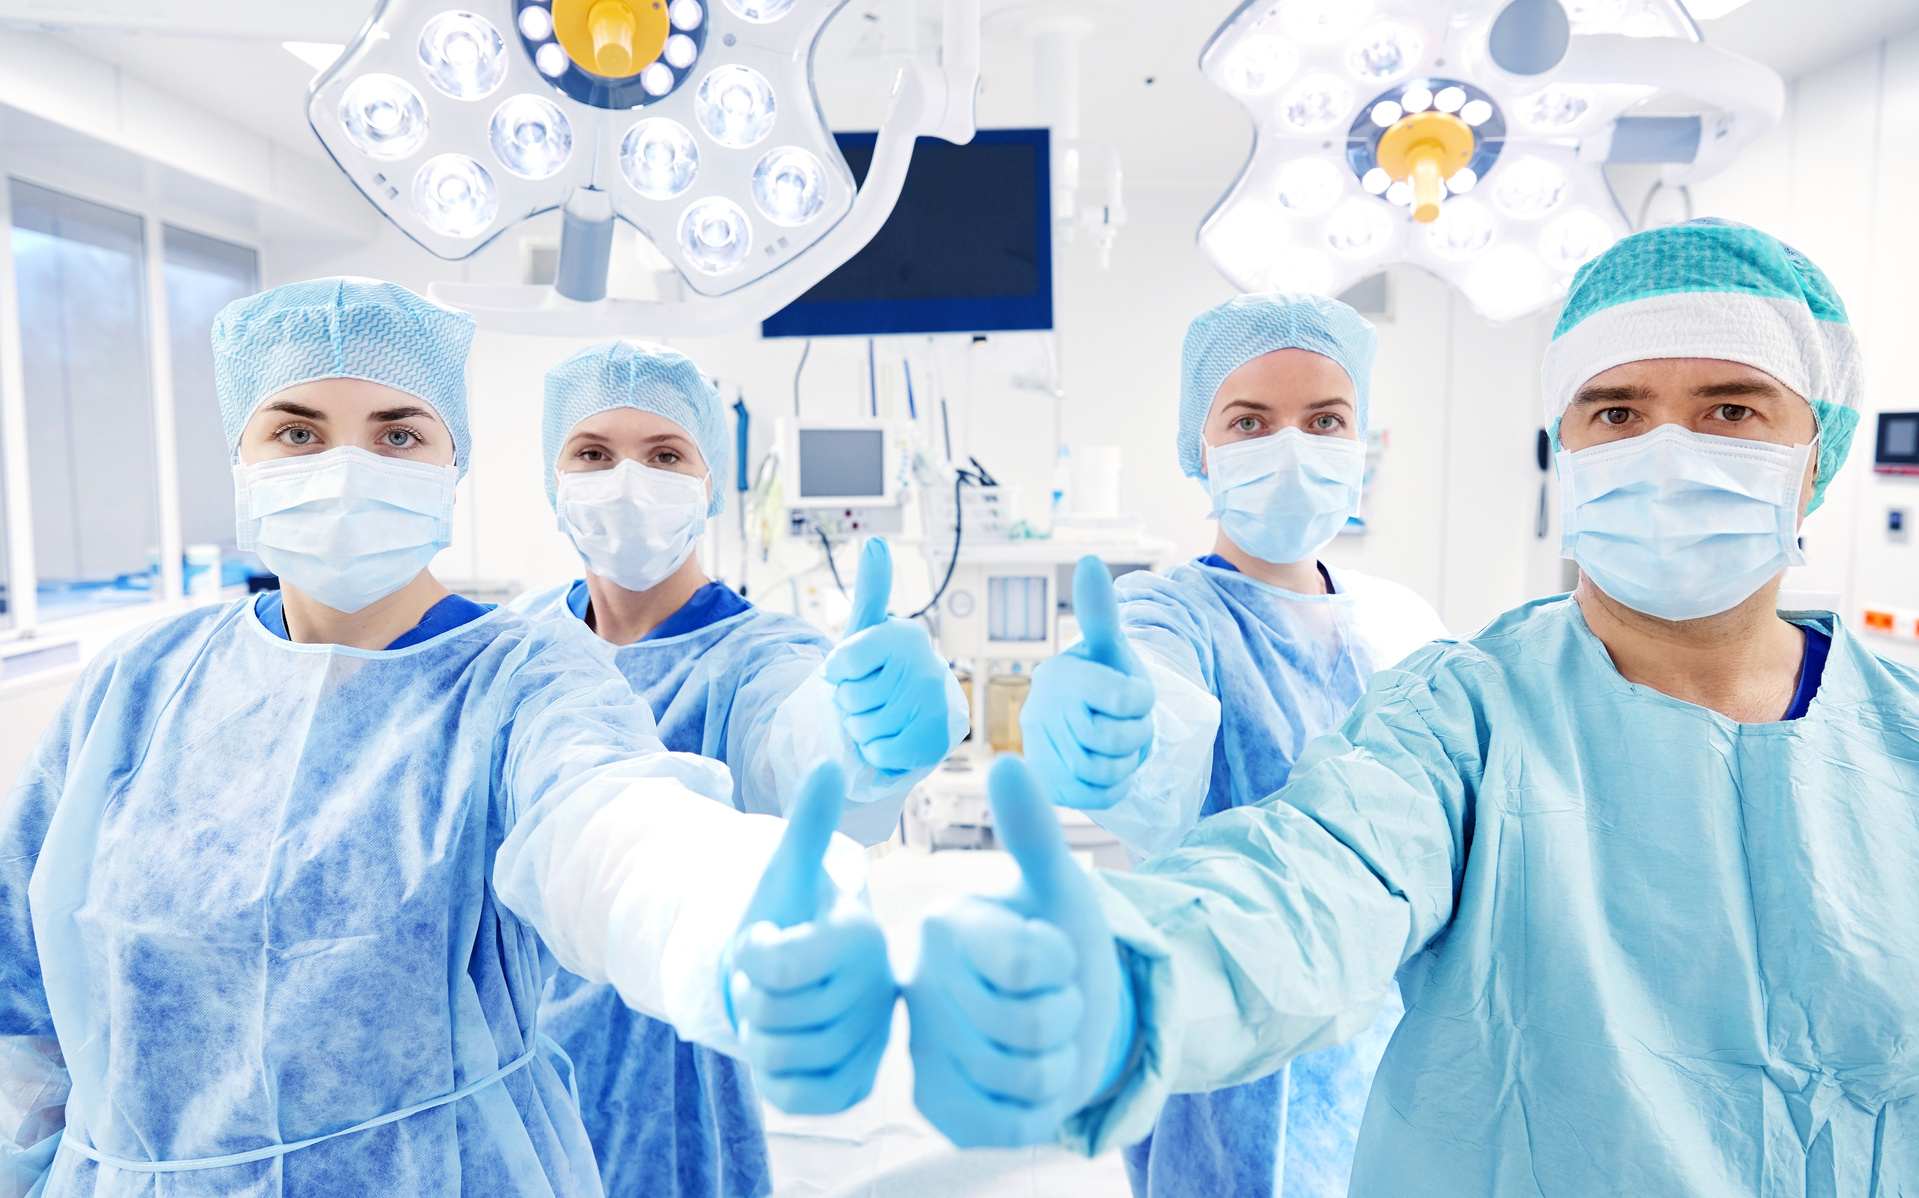 Group of Surgeons in Operating Room at Hospital